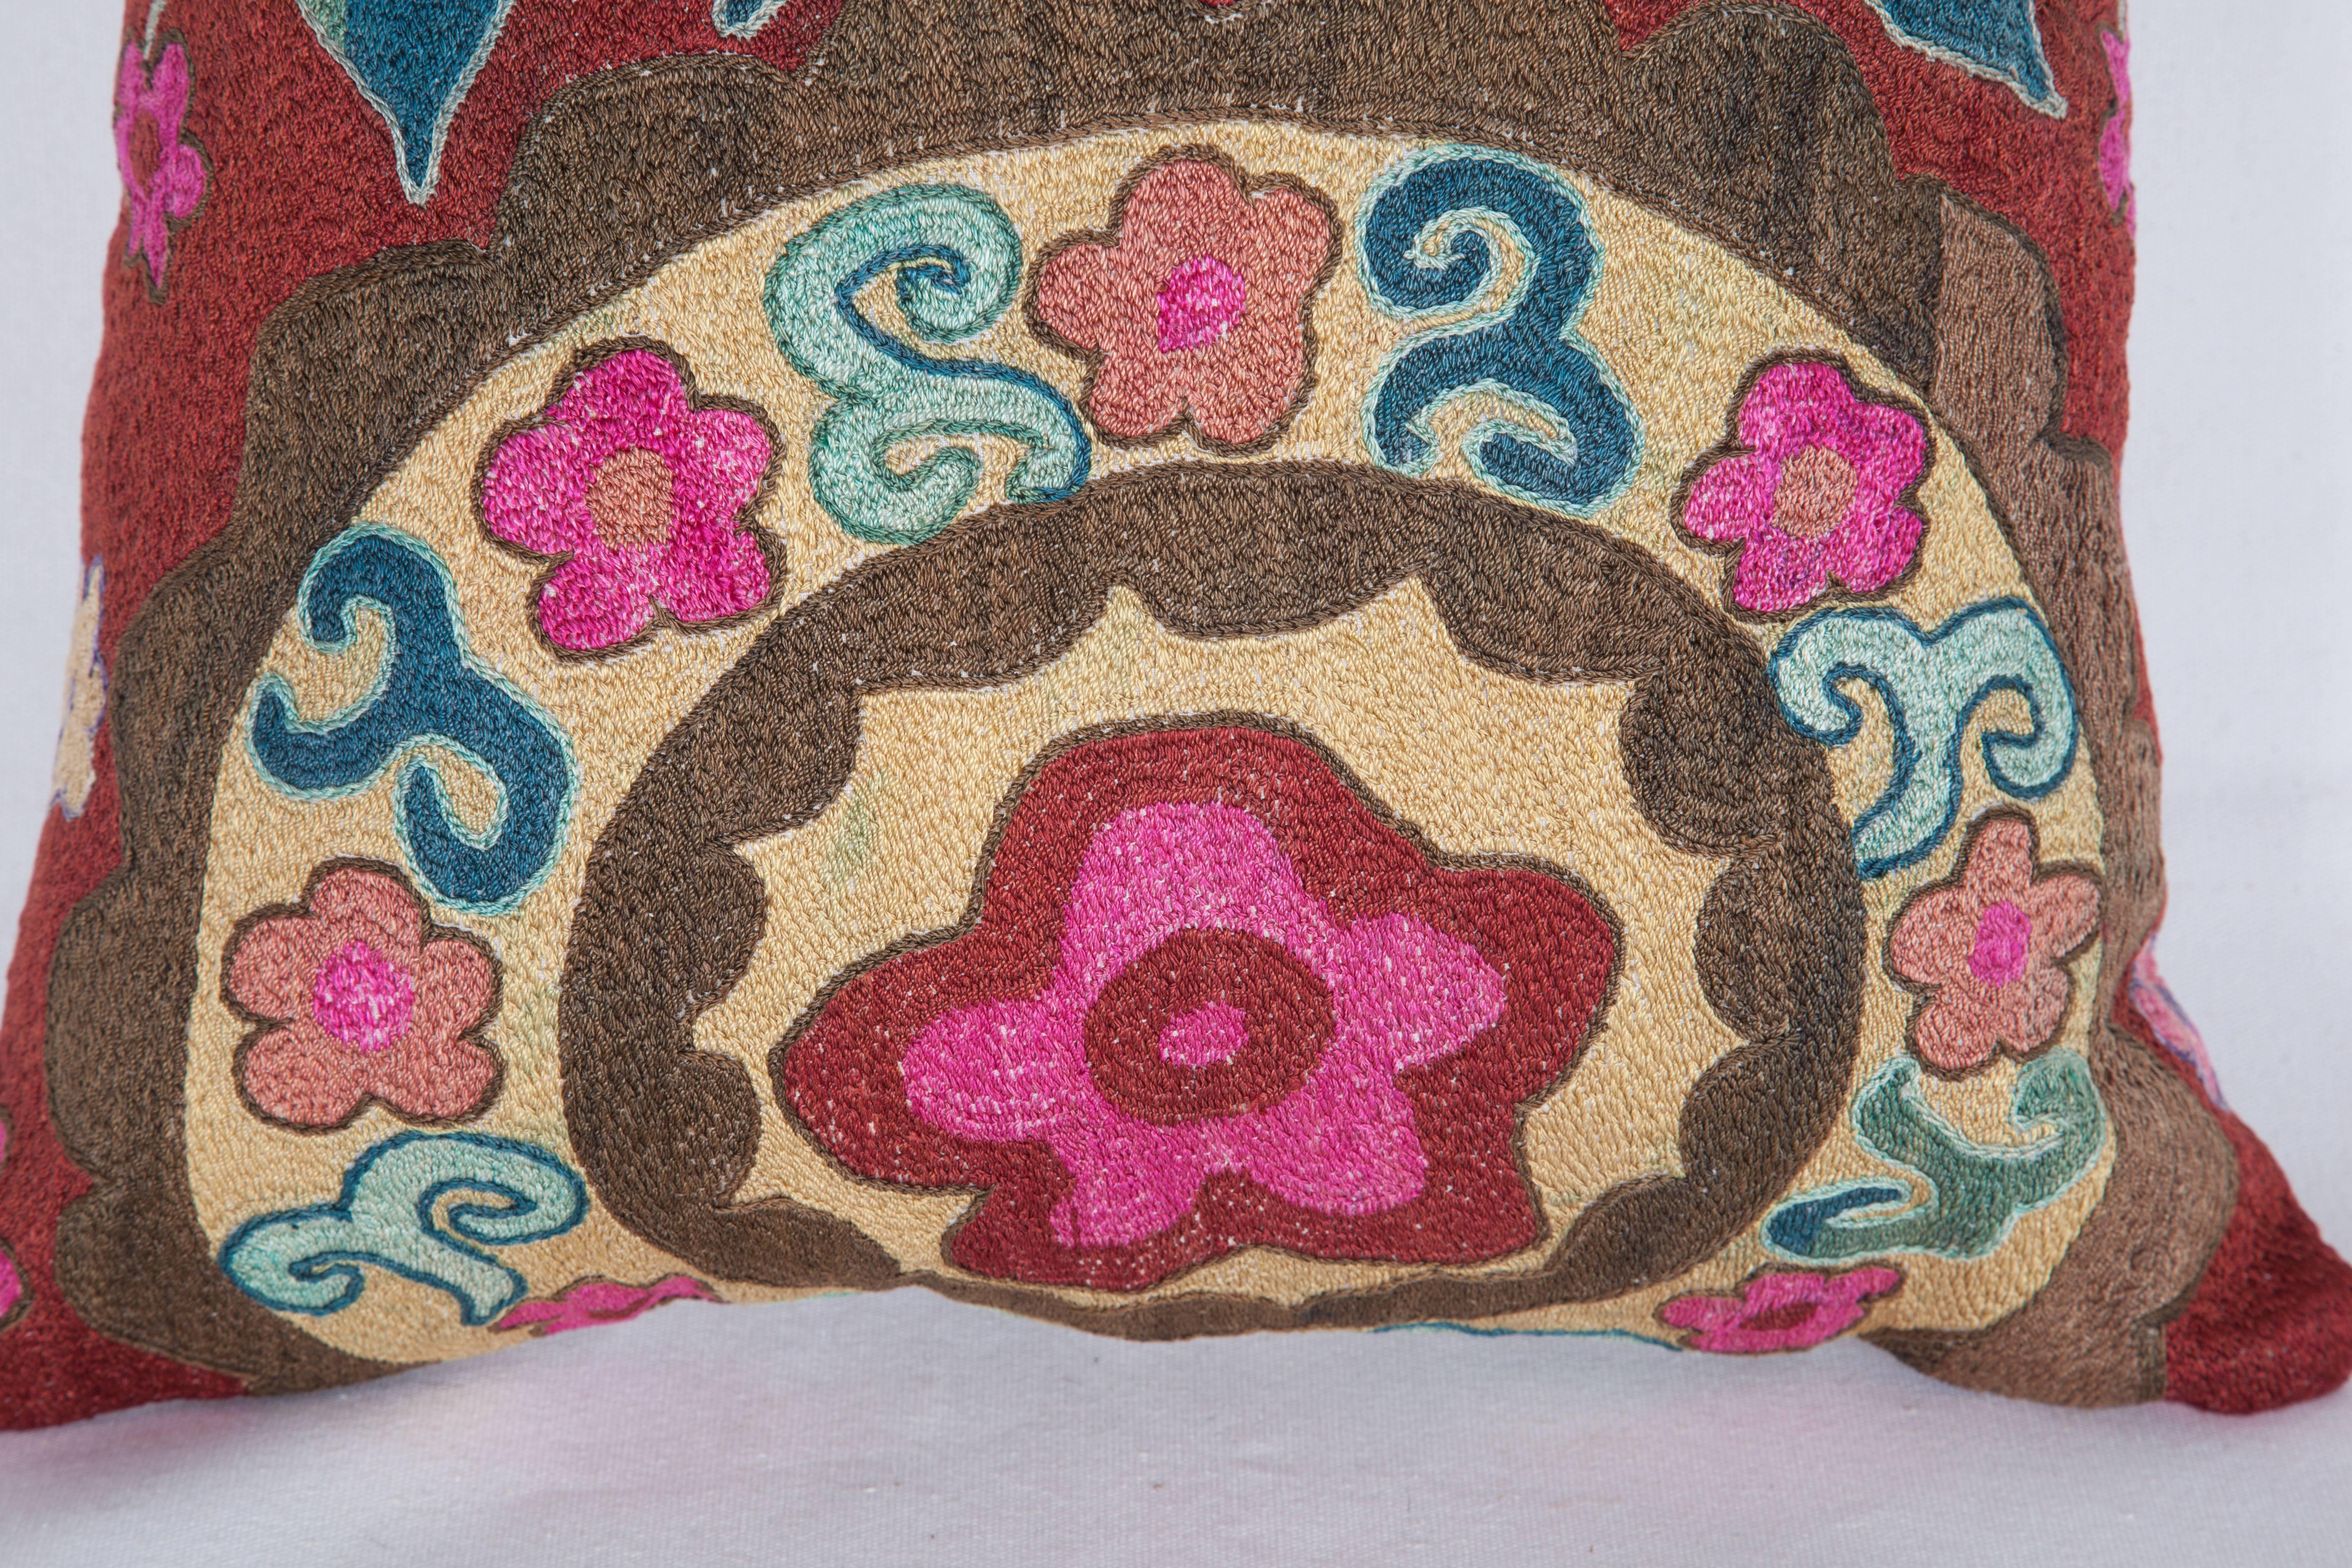 Embroidered Vintage Pillow Made Out of a 1970s Pishkent Suzani